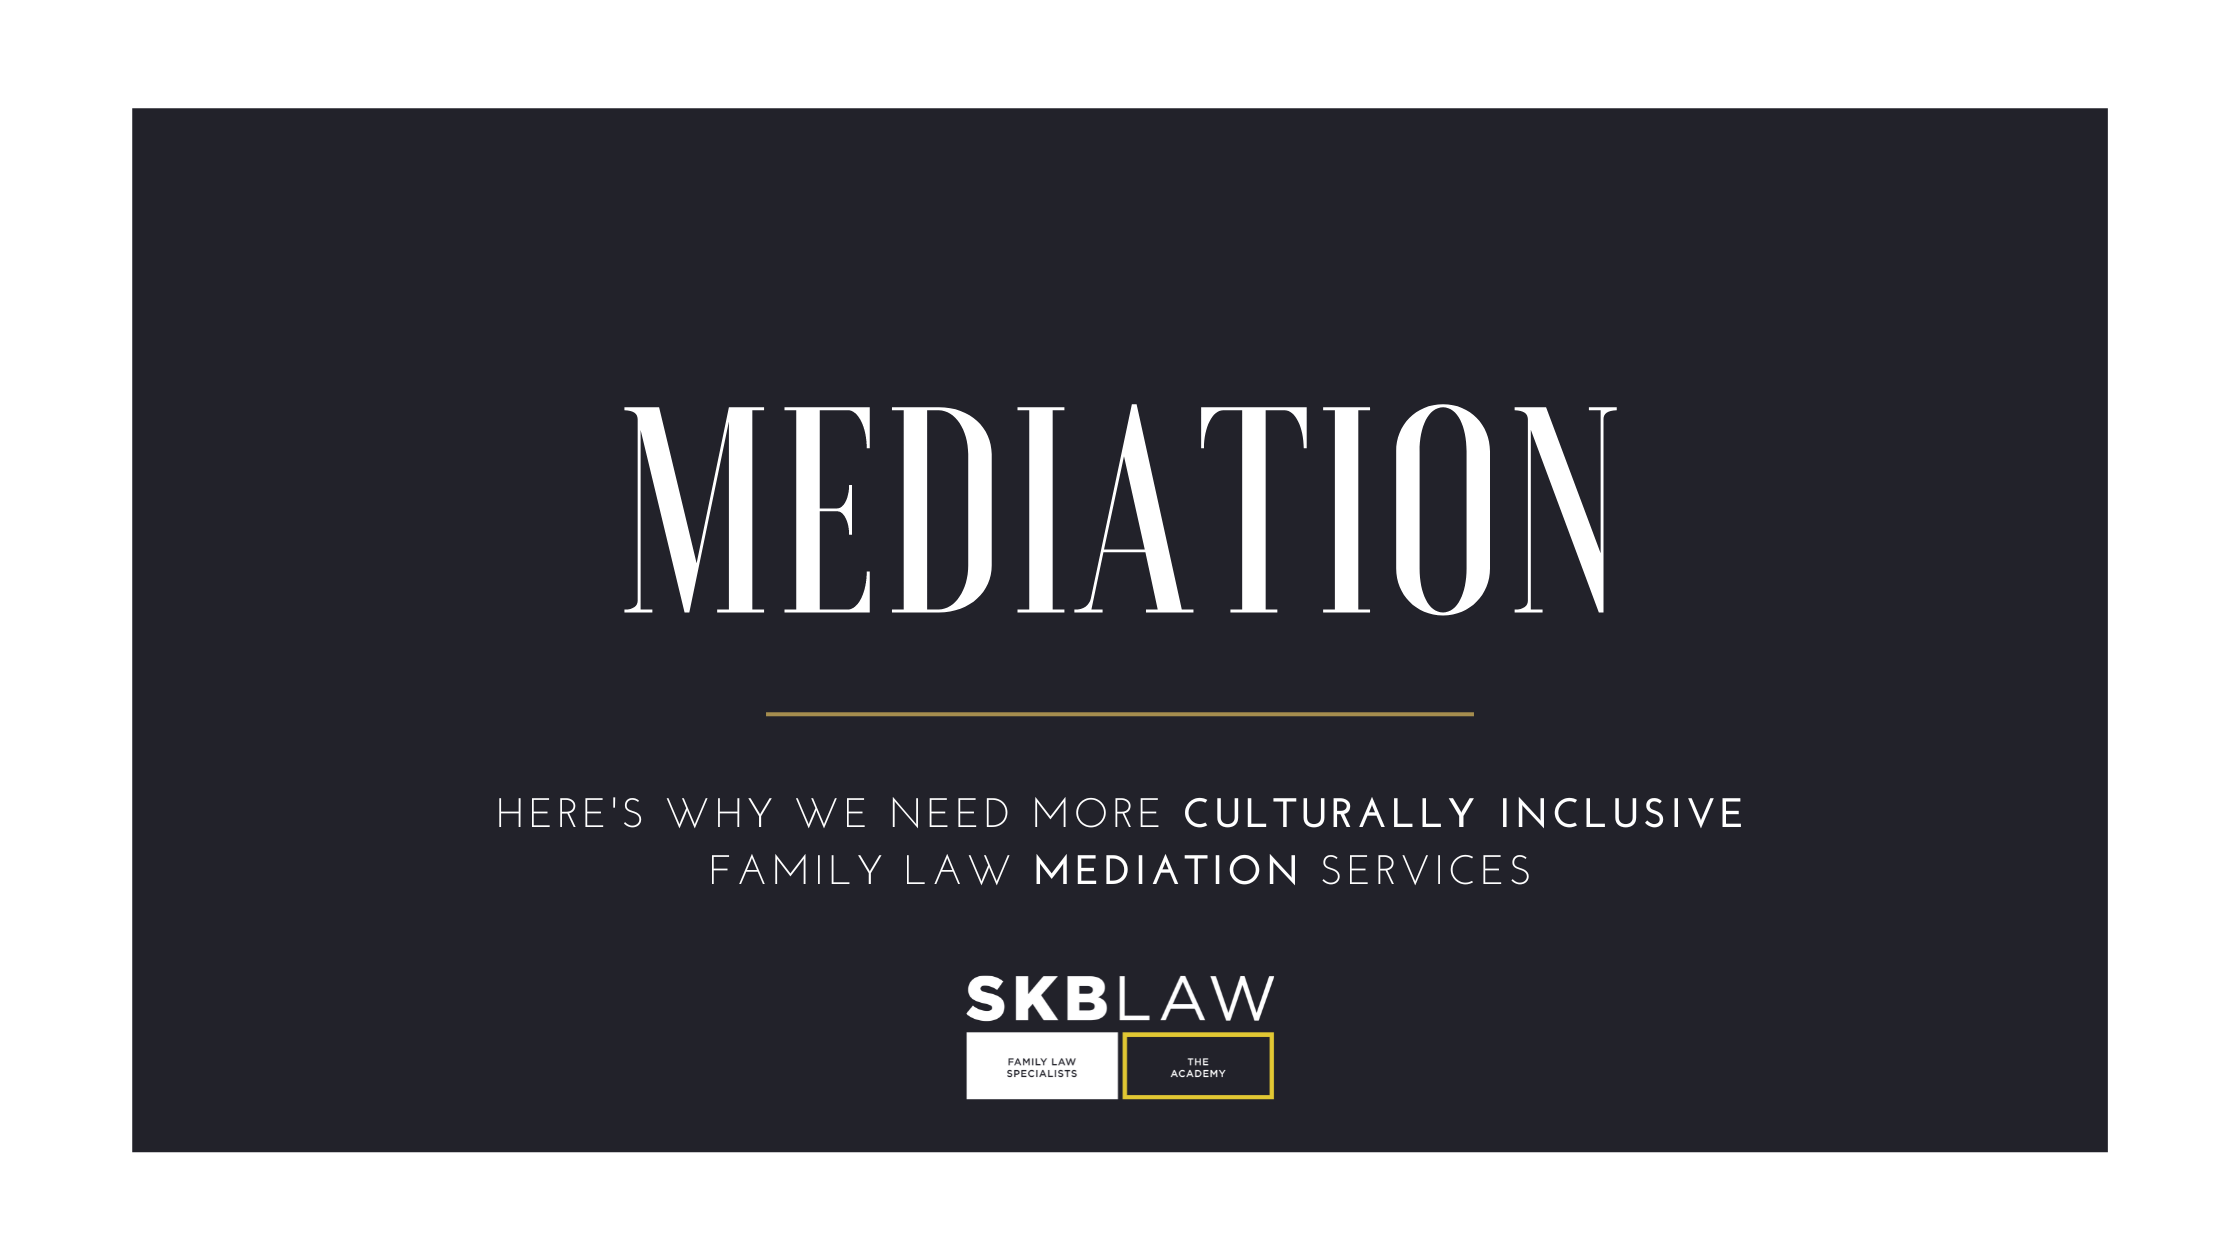 The words mediation are displayed against a black box, with a white background